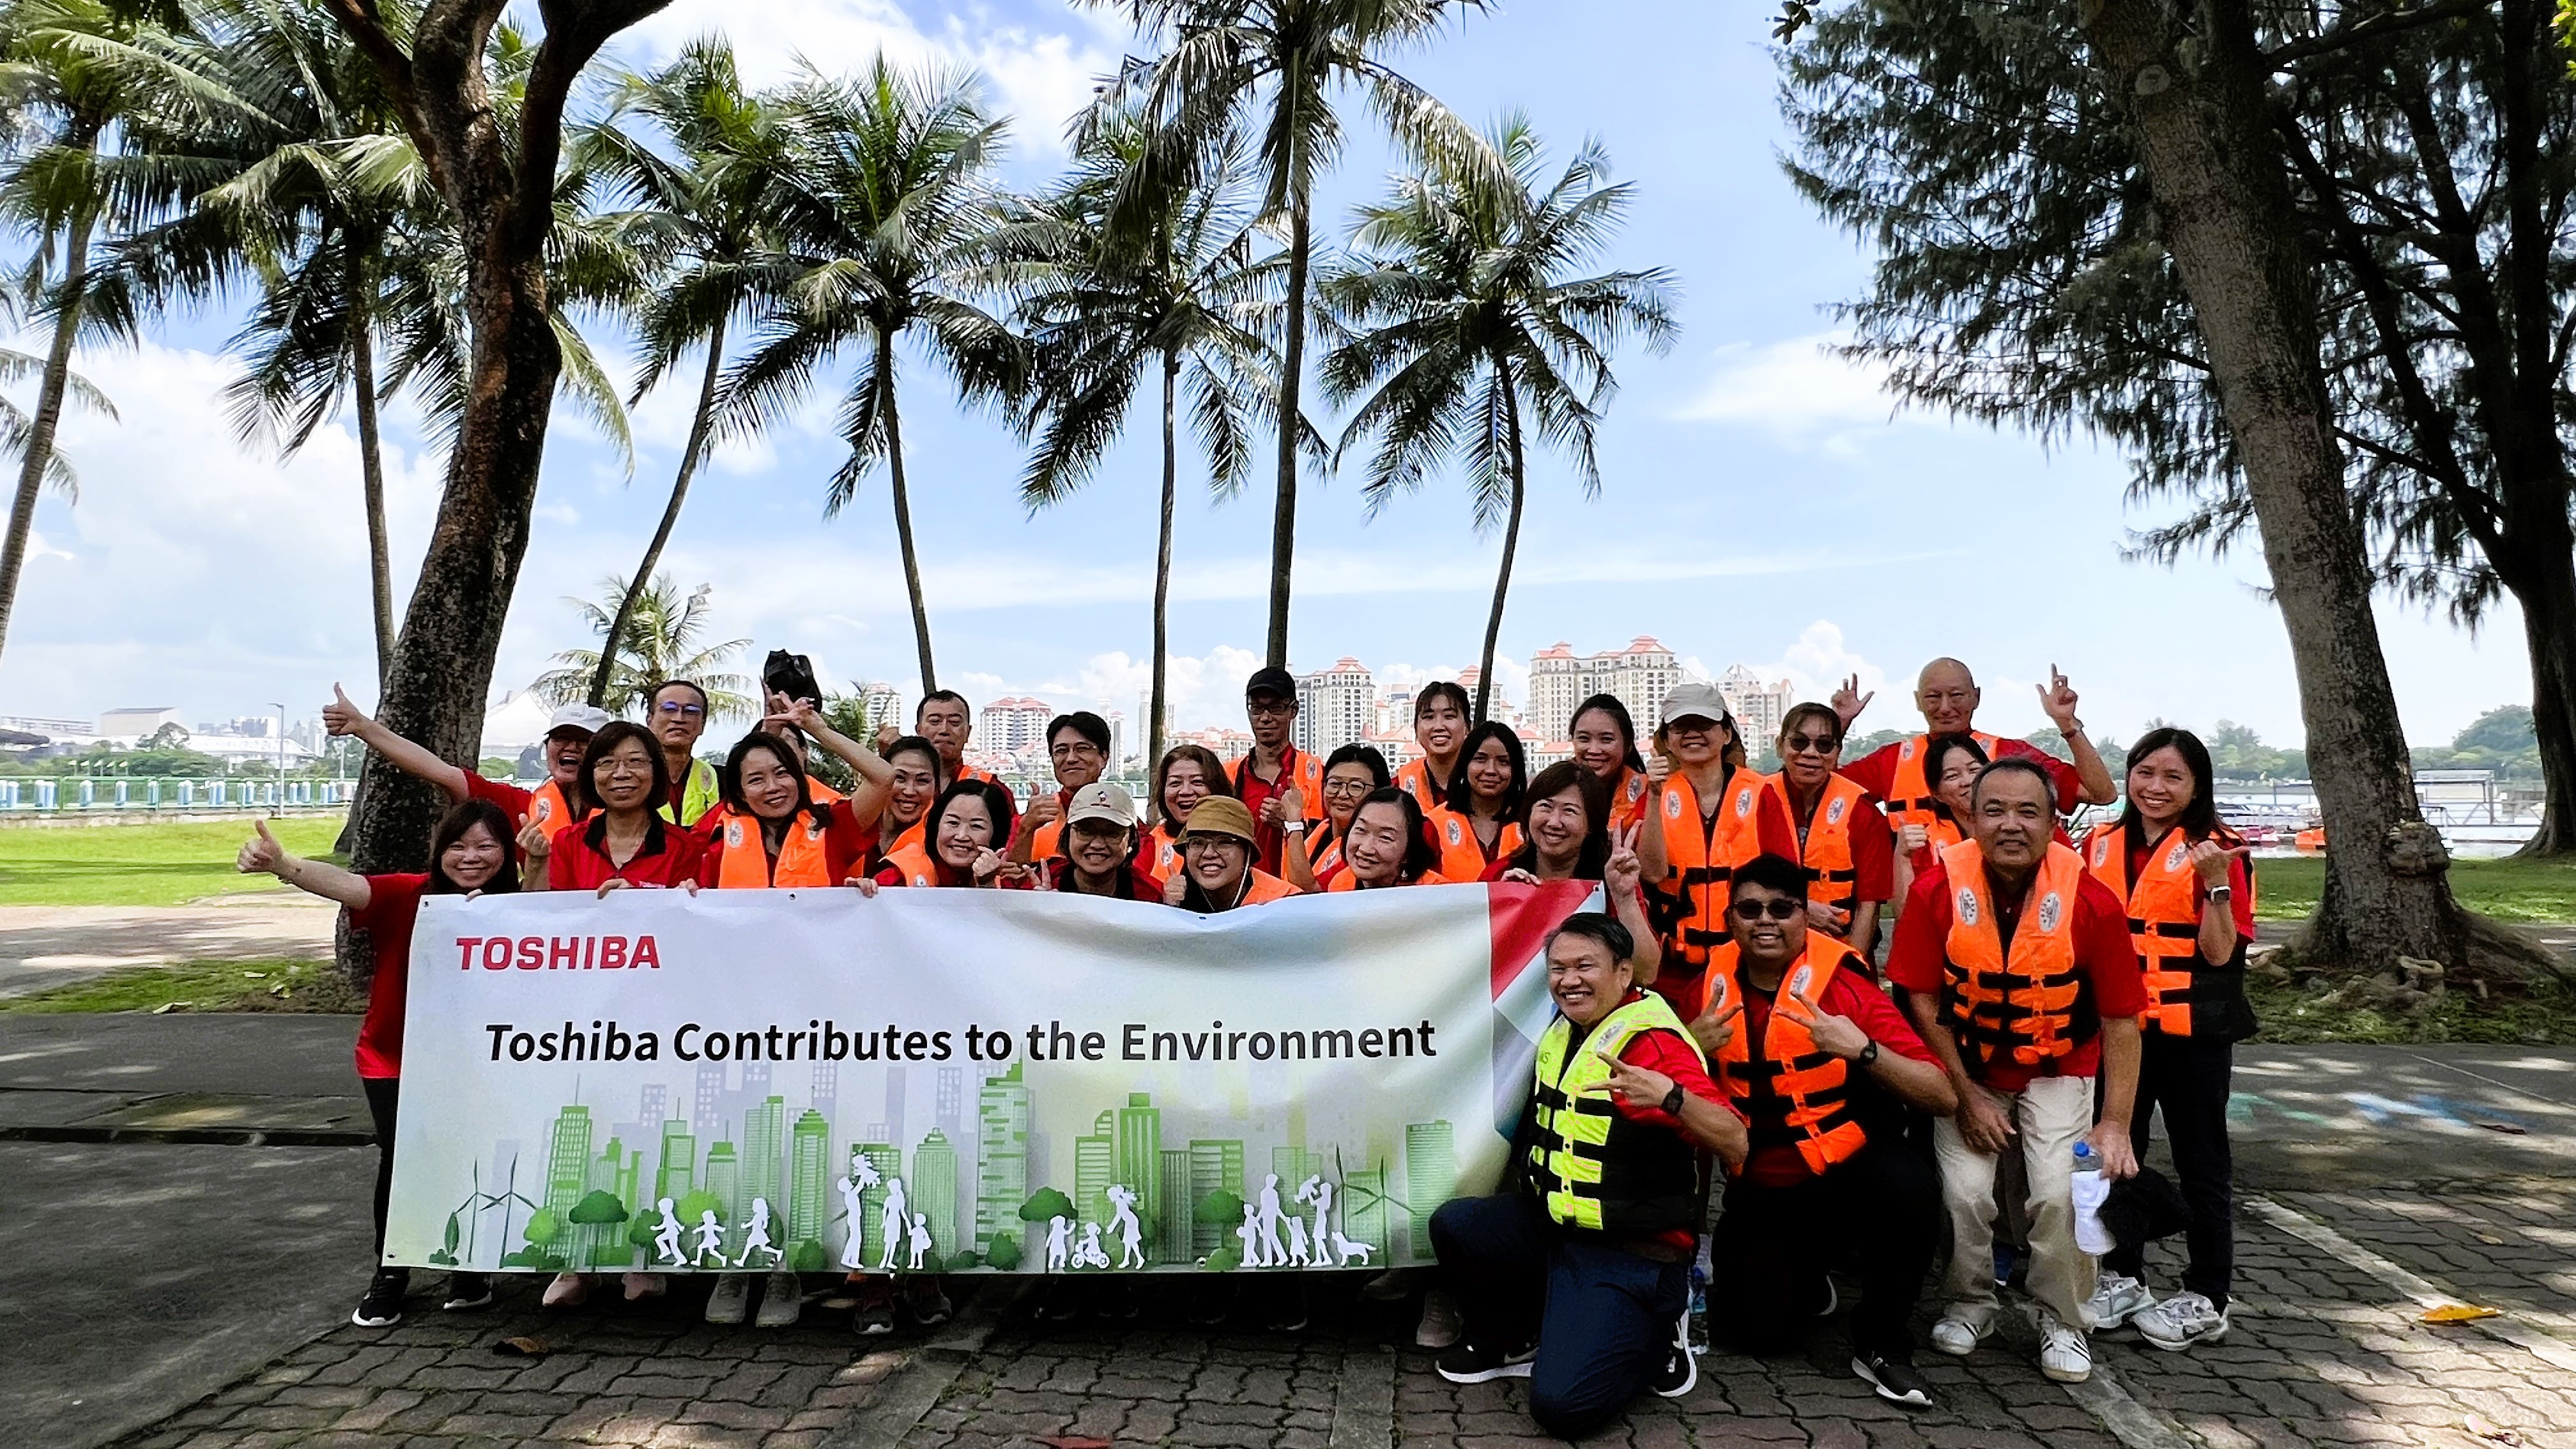 Toshiba’s CSR Activity contributes to the Sustainability of Singapore’s Waterway Clean-Up